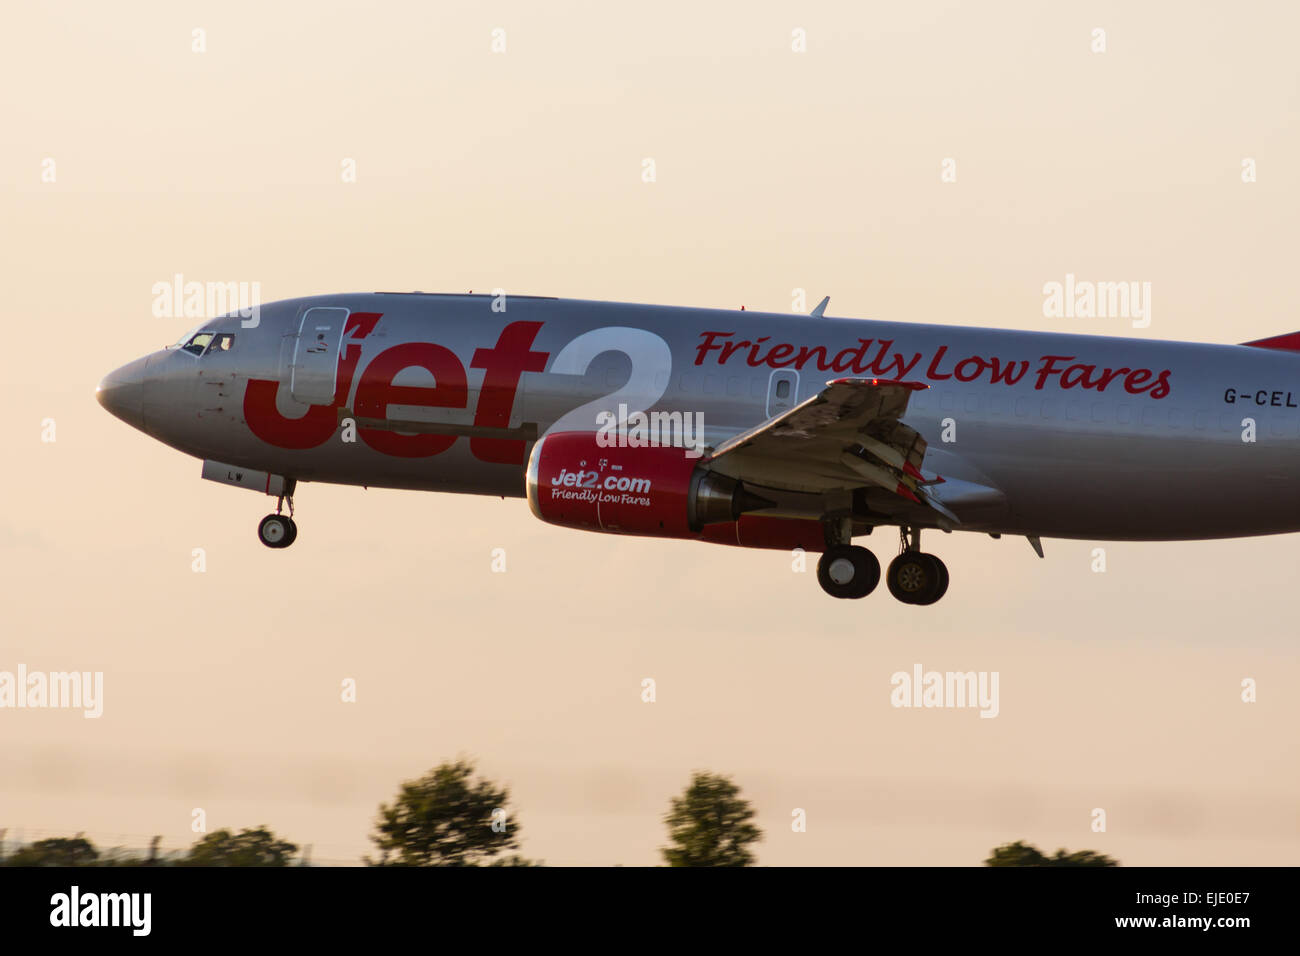 Jet2 Airlines - Friendly Low Fares Stock Photo